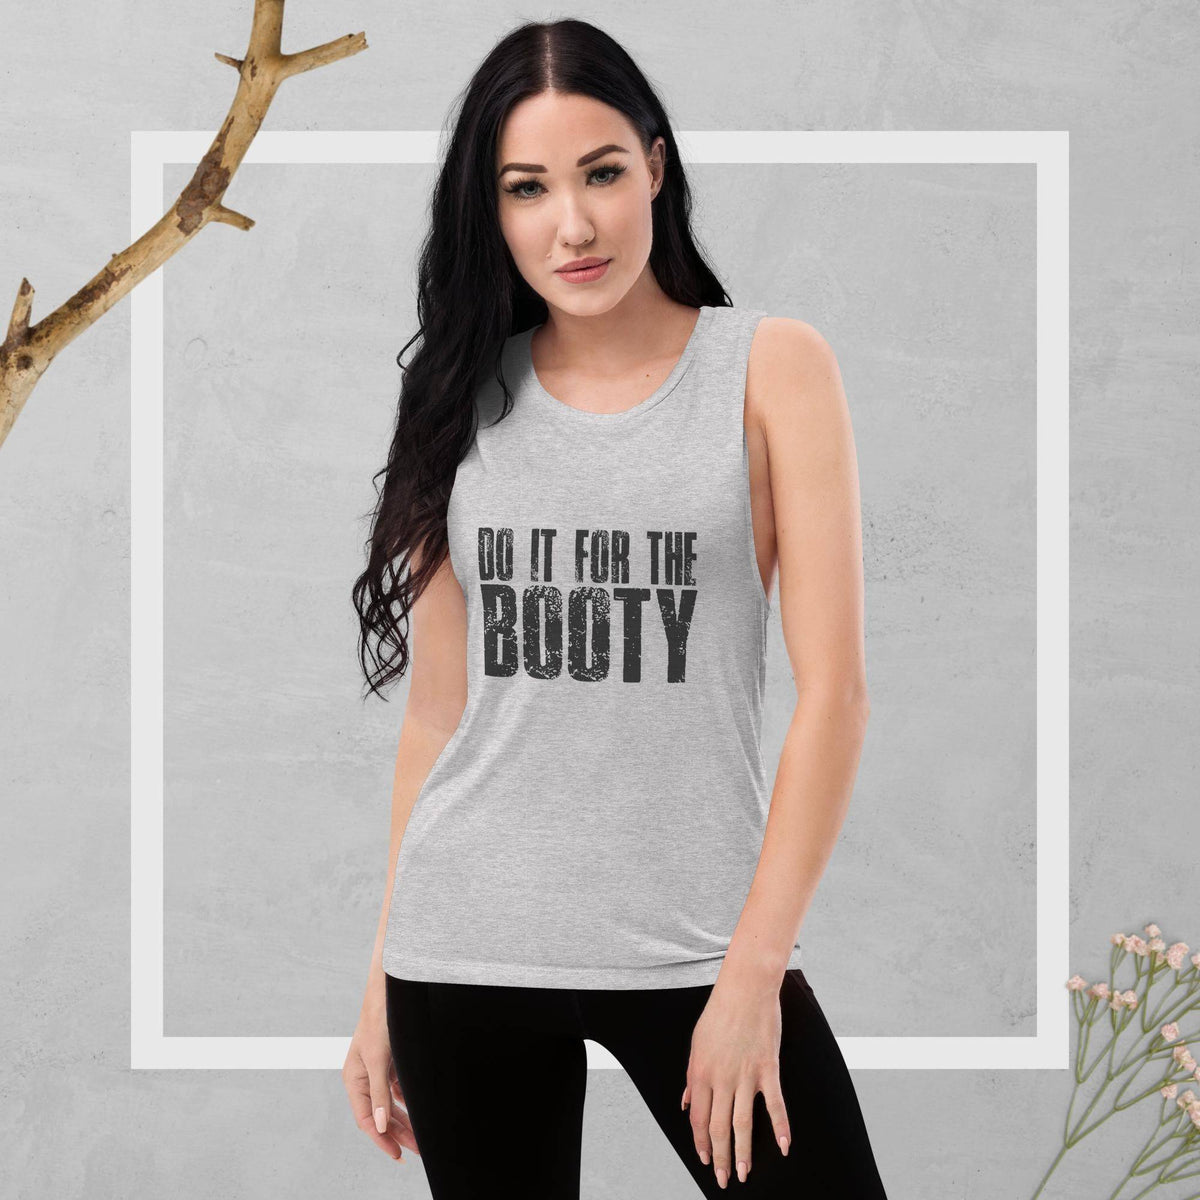 Ladies Muscle Workout Tank Top Australia - Revive Wear     Ladies Muscle Workout Tank. Lightweight &amp; cool Tank Top with extra wide arm holes for a total HITT workout. Shop Tank Tops today.